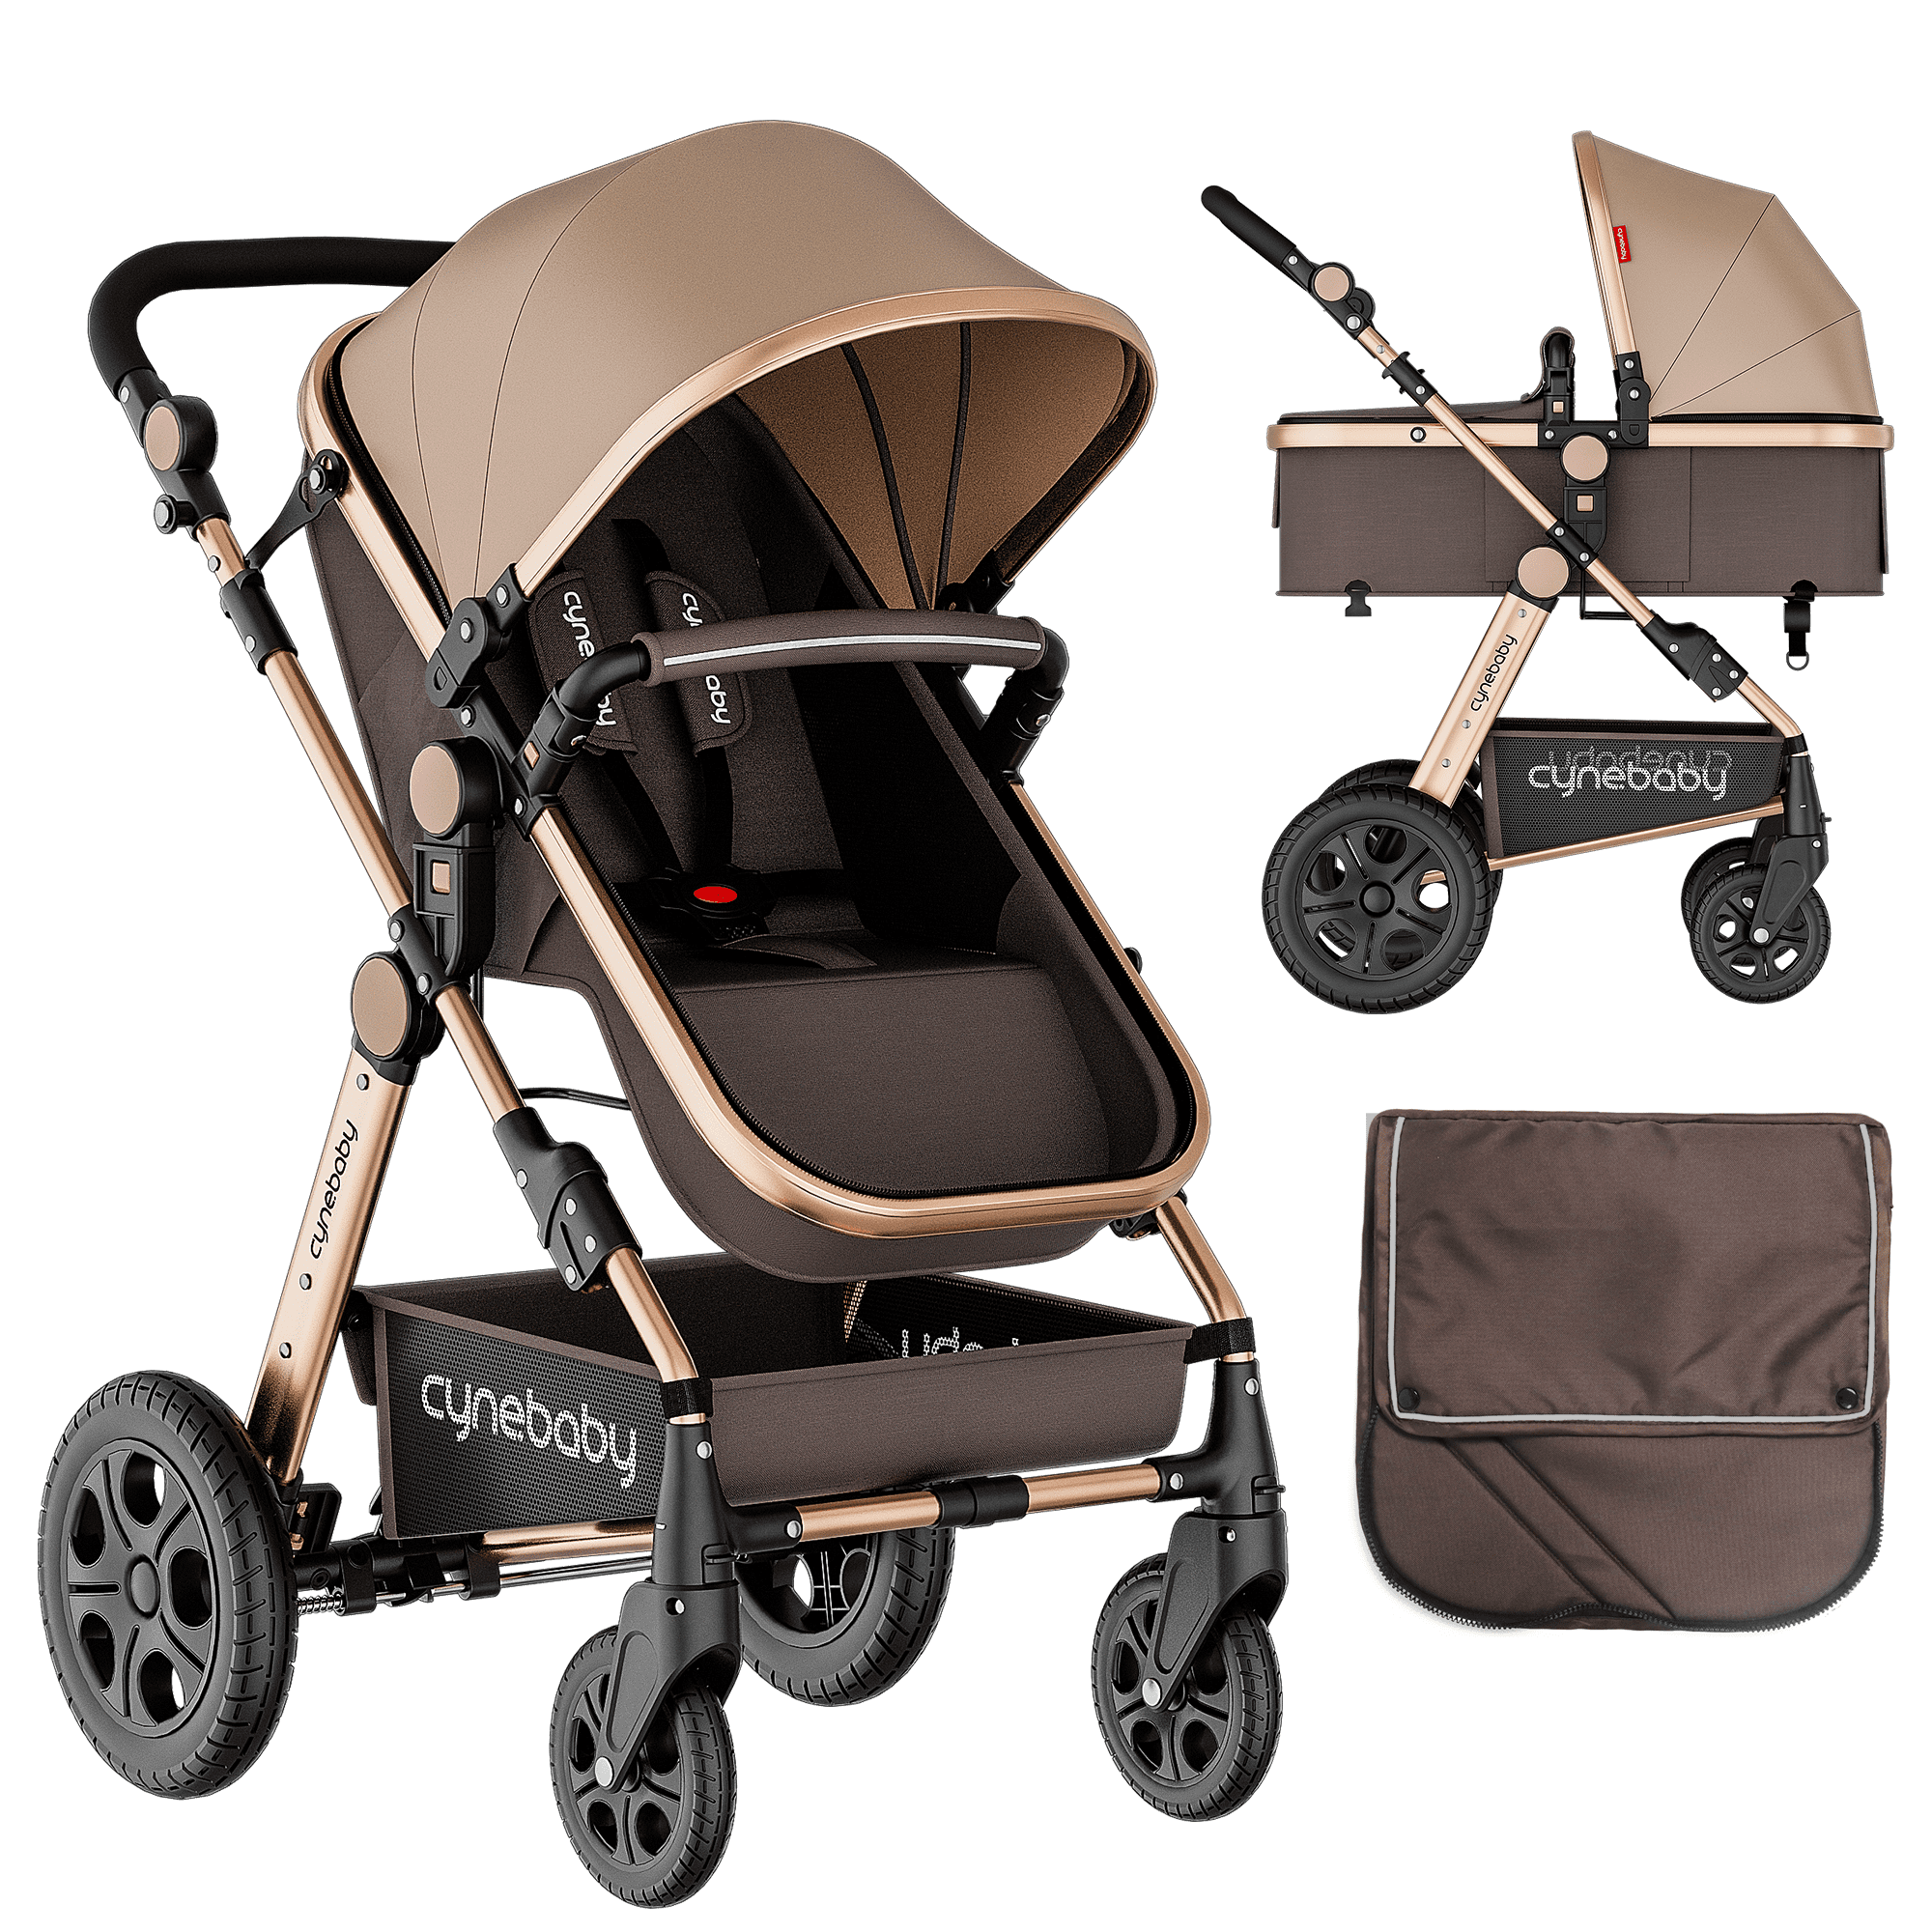 34.3 x 14.9 x 42.9 Inch 2-in-1 High Landscape Bassinet Infant and Newborn Pushchair Grey Bassinet Reversible Convertible Baby Strollers 